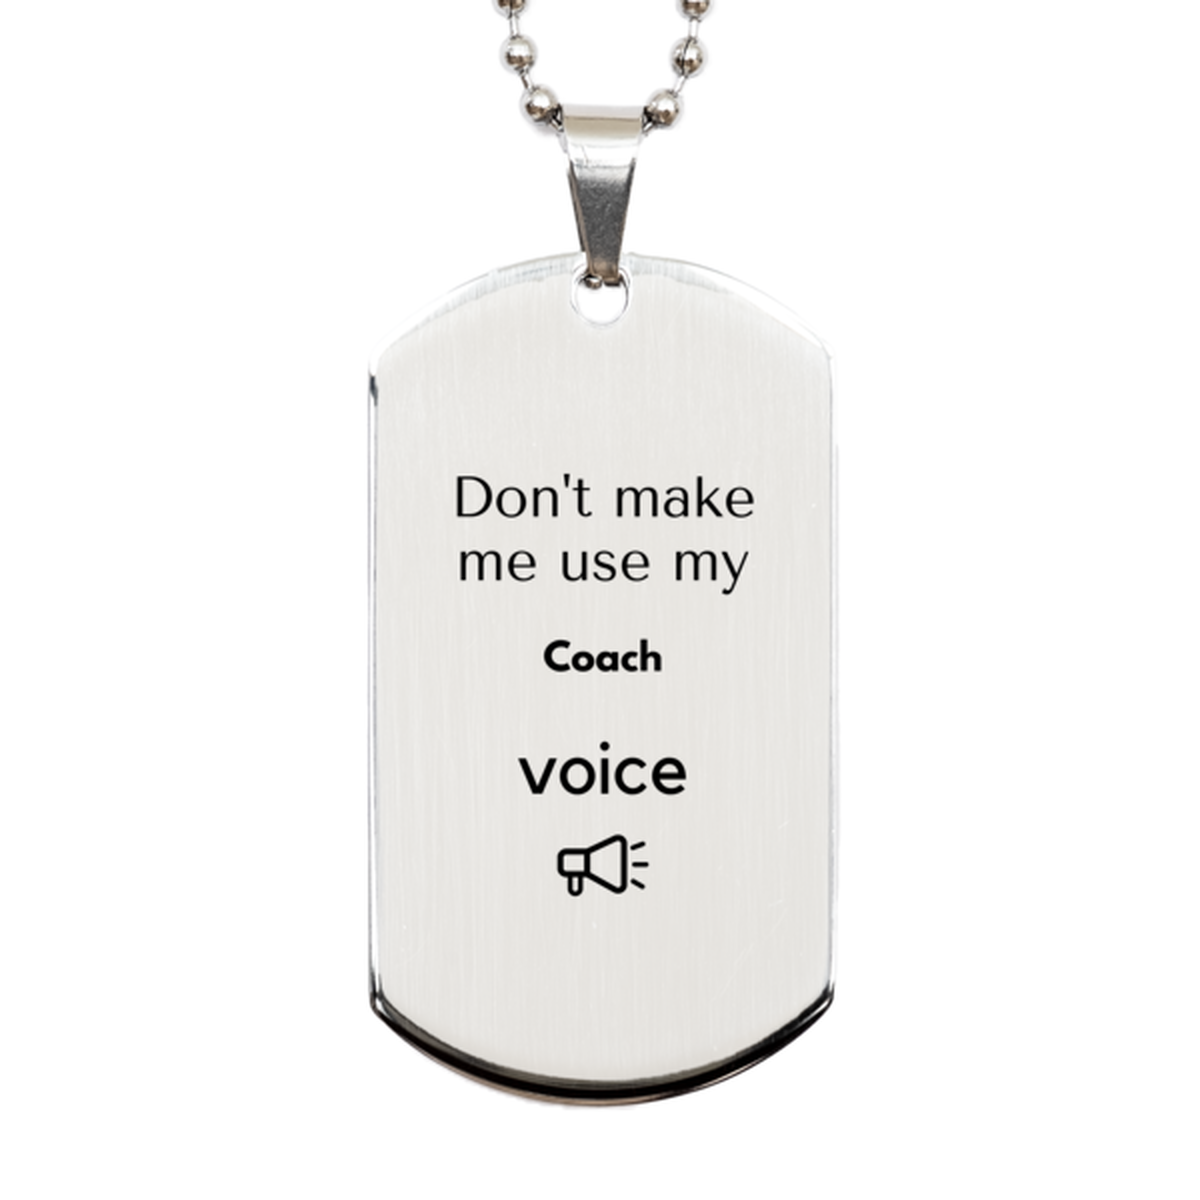 Don't make me use my Coach voice, Sarcasm Coach Gifts, Christmas Coach Silver Dog Tag Birthday Unique Gifts For Coach Coworkers, Men, Women, Colleague, Friends